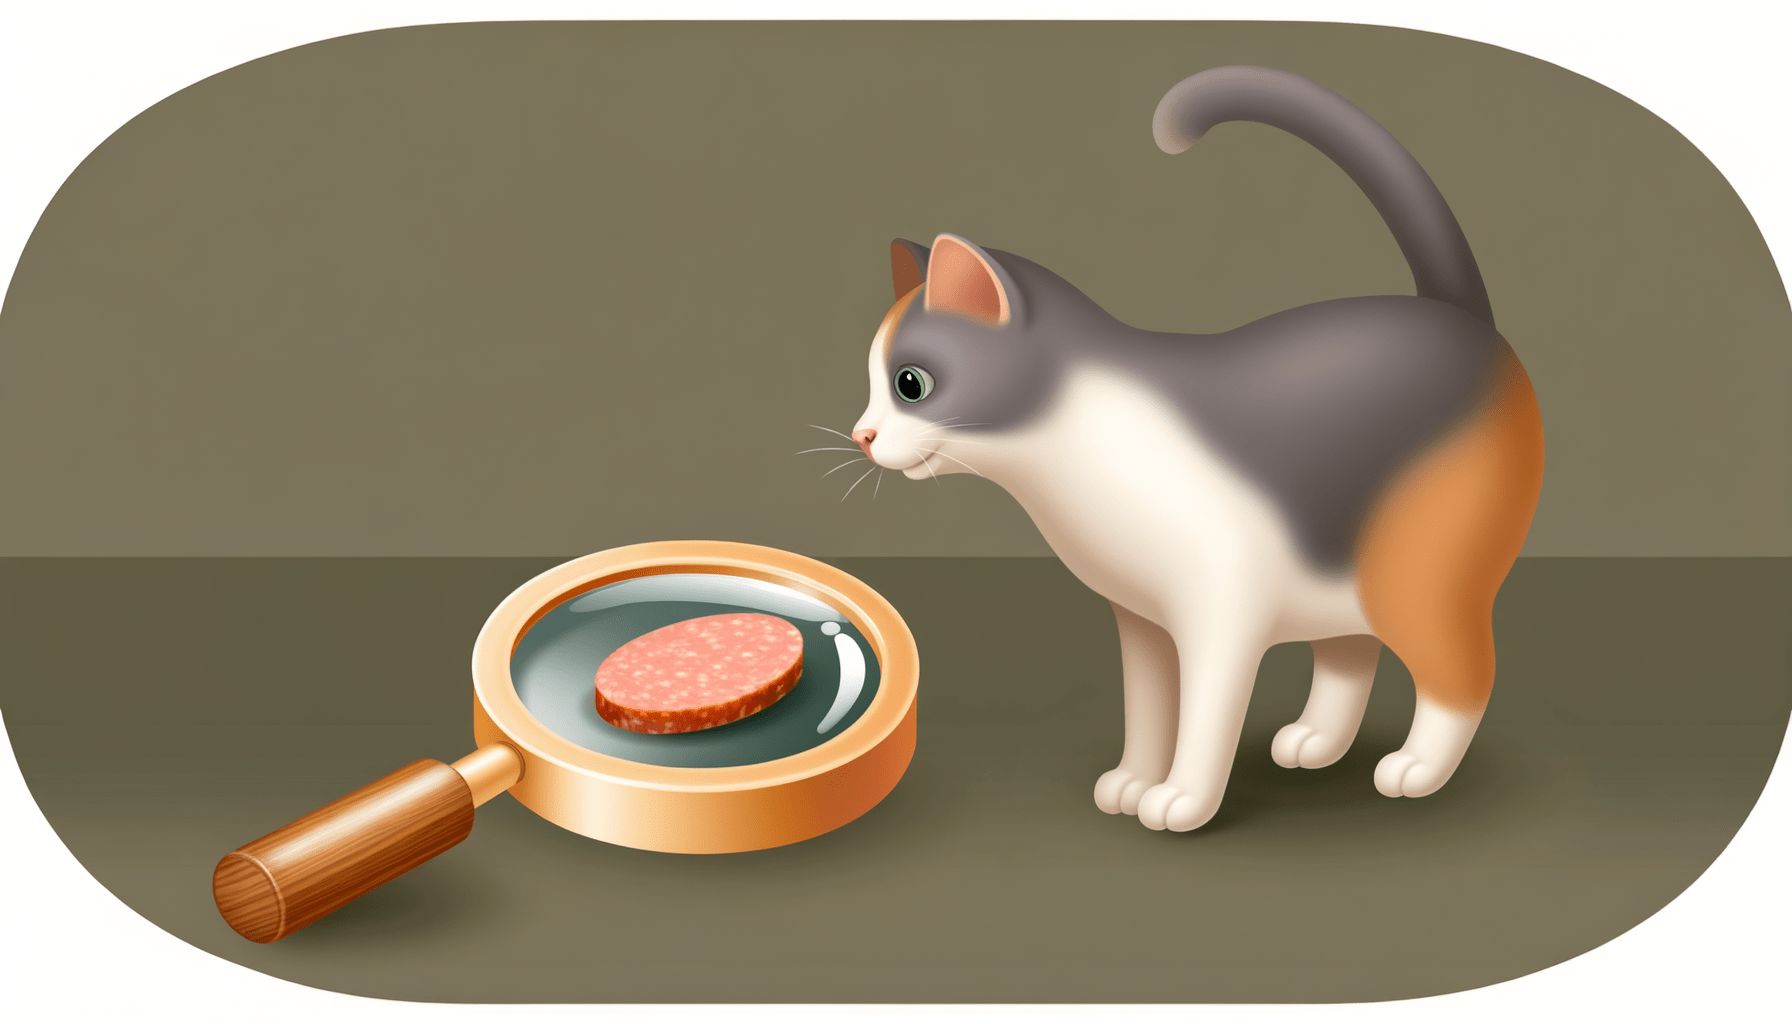 "Deciphering Feline Diets: Can Cats Really Eat Bologna?"